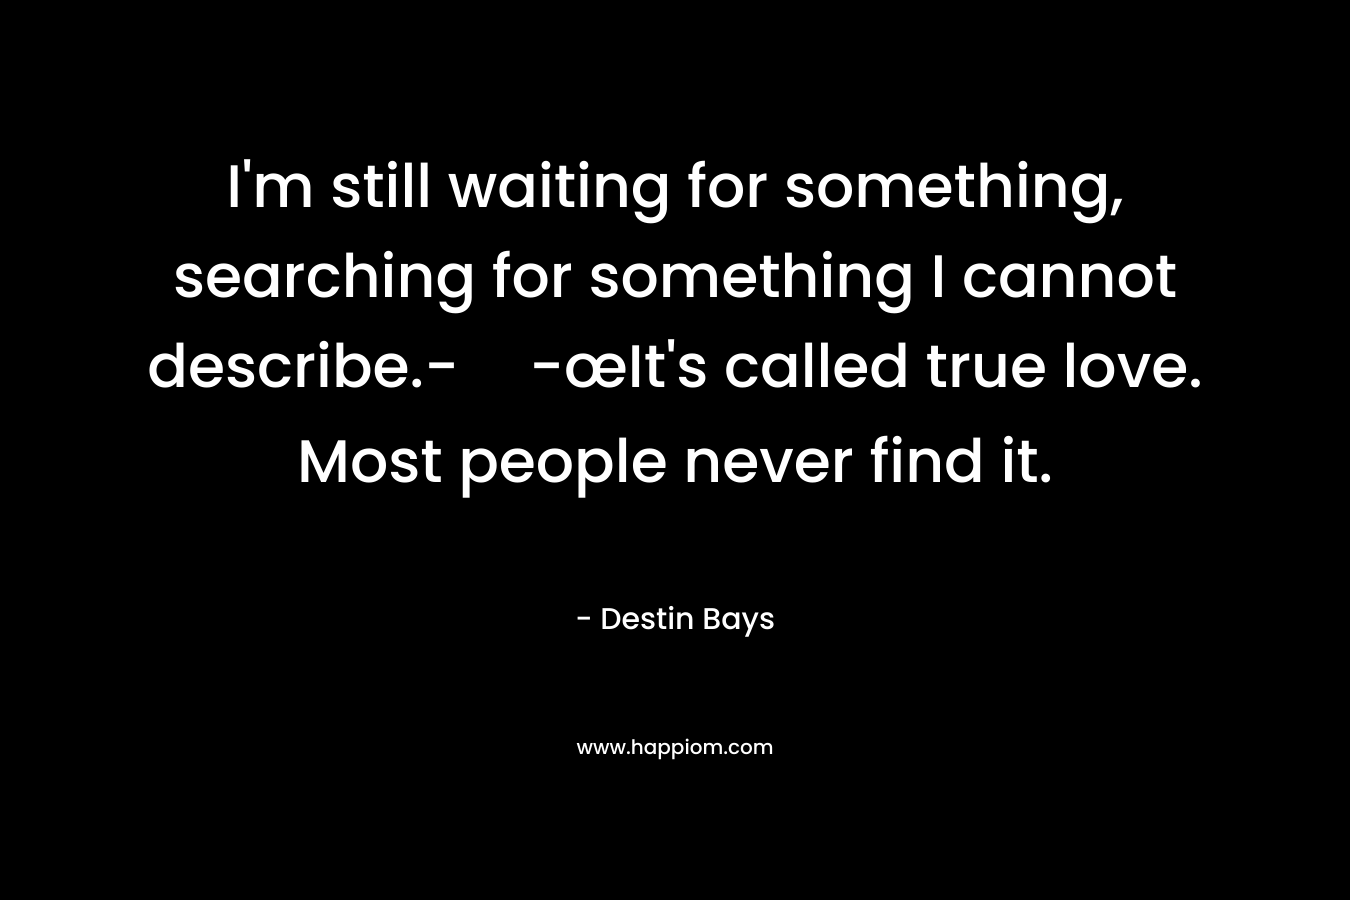 I’m still waiting for something, searching for something I cannot describe.--œIt’s called true love. Most people never find it. – Destin Bays